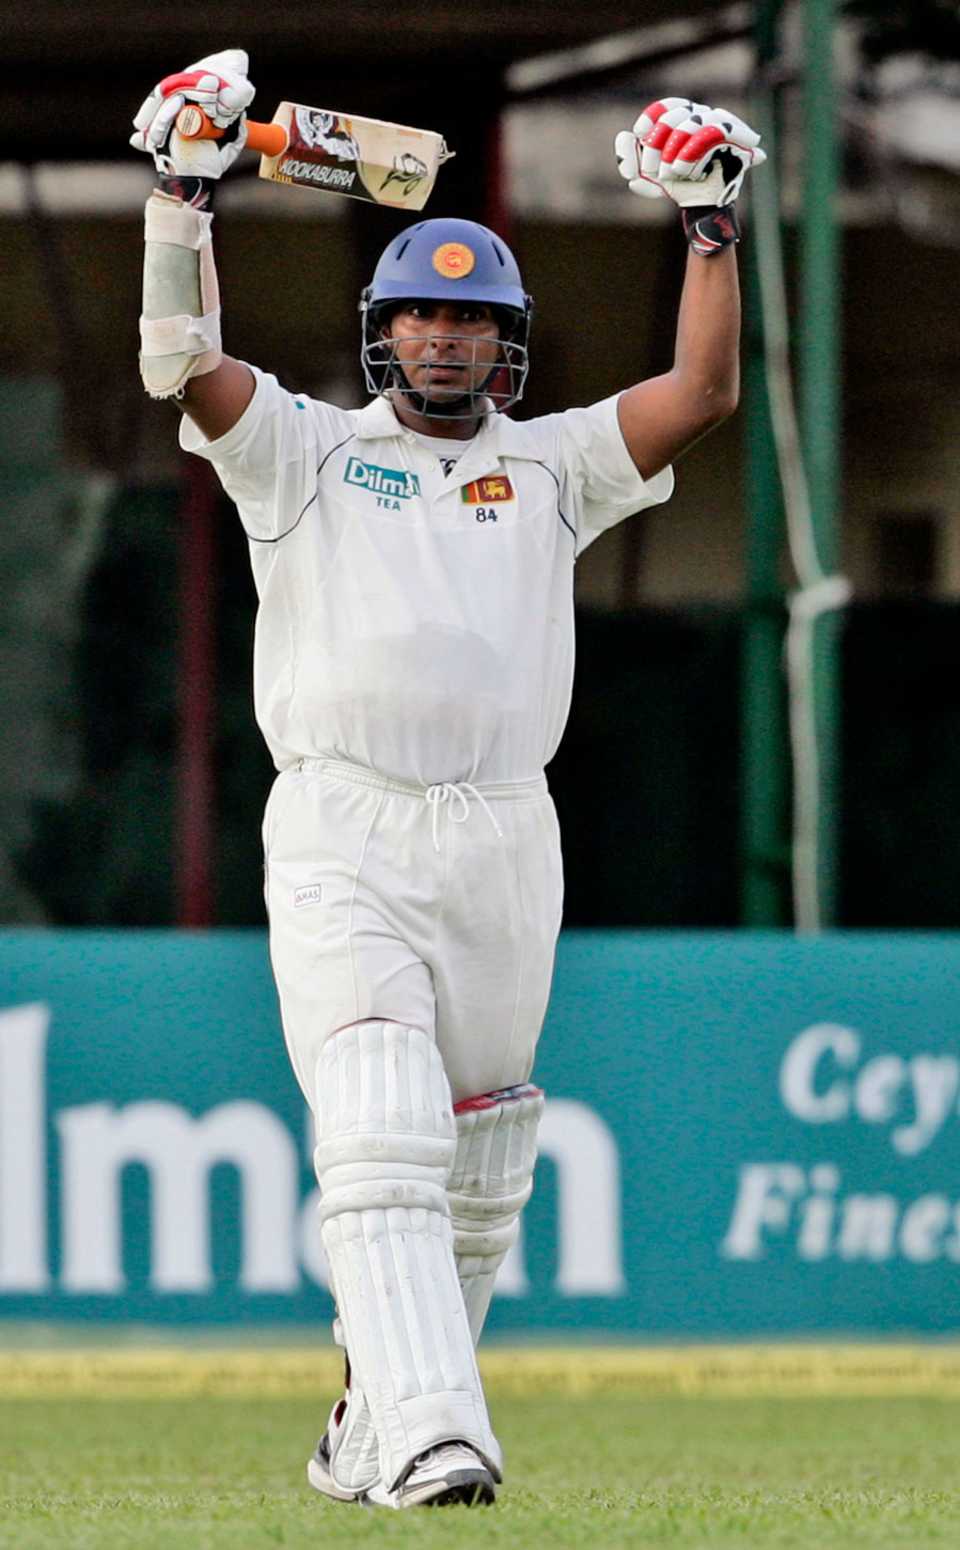 Kumar Sangakkara raises his arms in celebration after getting to a hundred, Sri Lanka v India, 3rd Test, P Sara Oval, Colombo, 2nd day, August 9, 2008